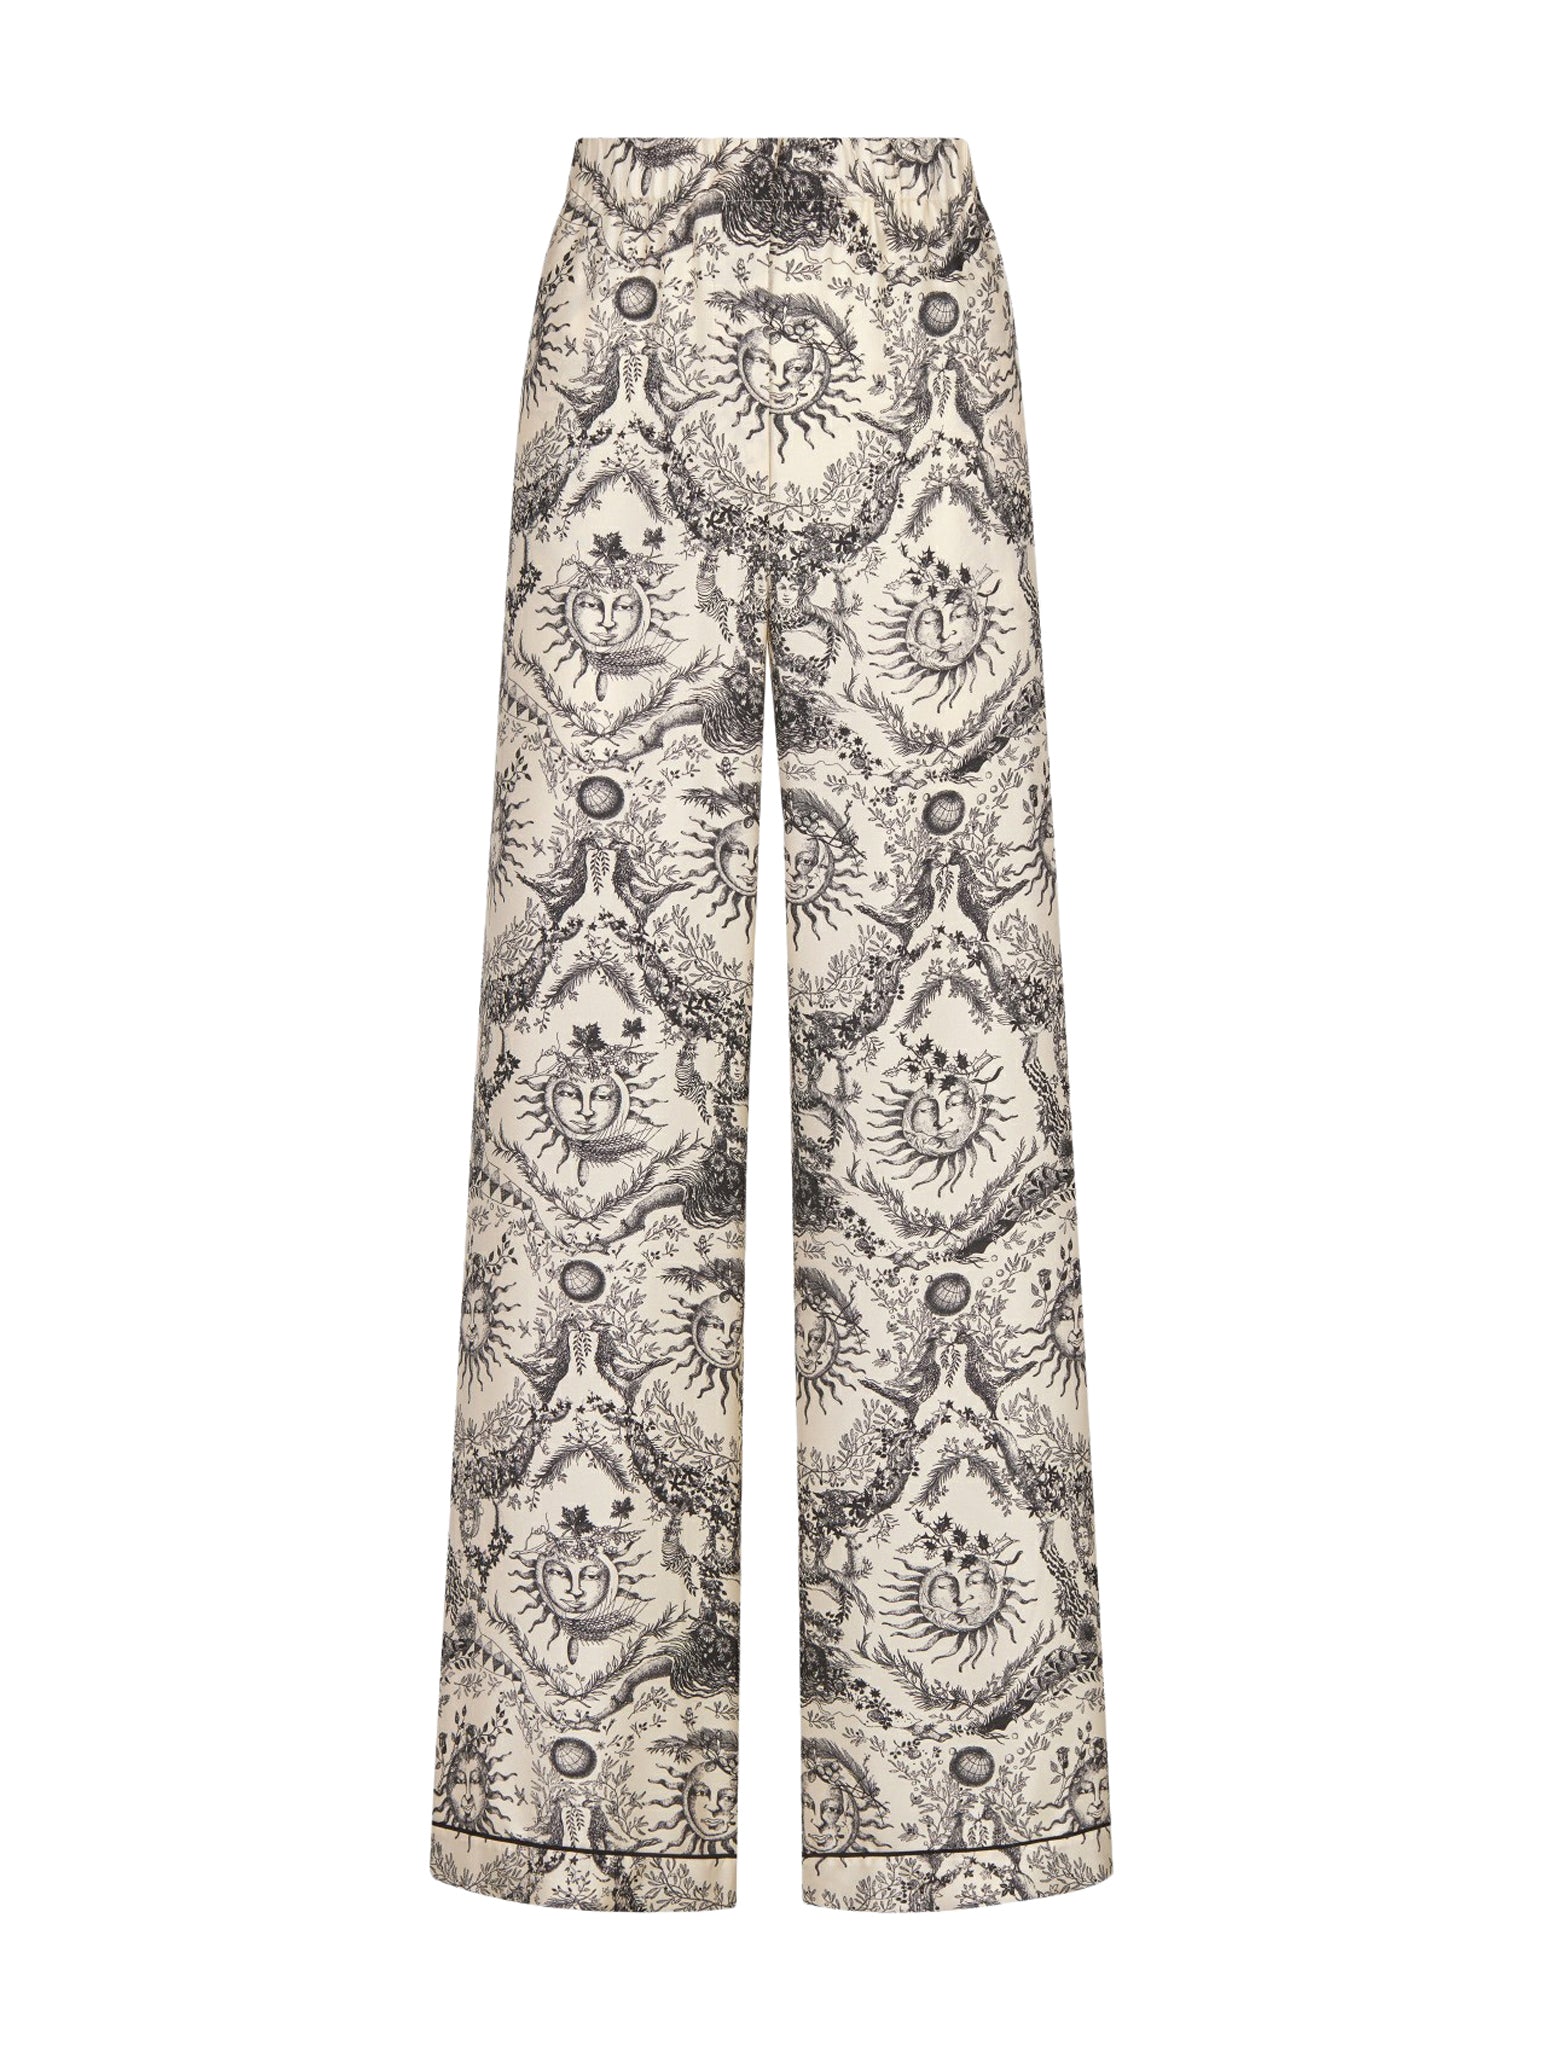 Trousers  White and gray Toile de Jouy Soleil silk twill